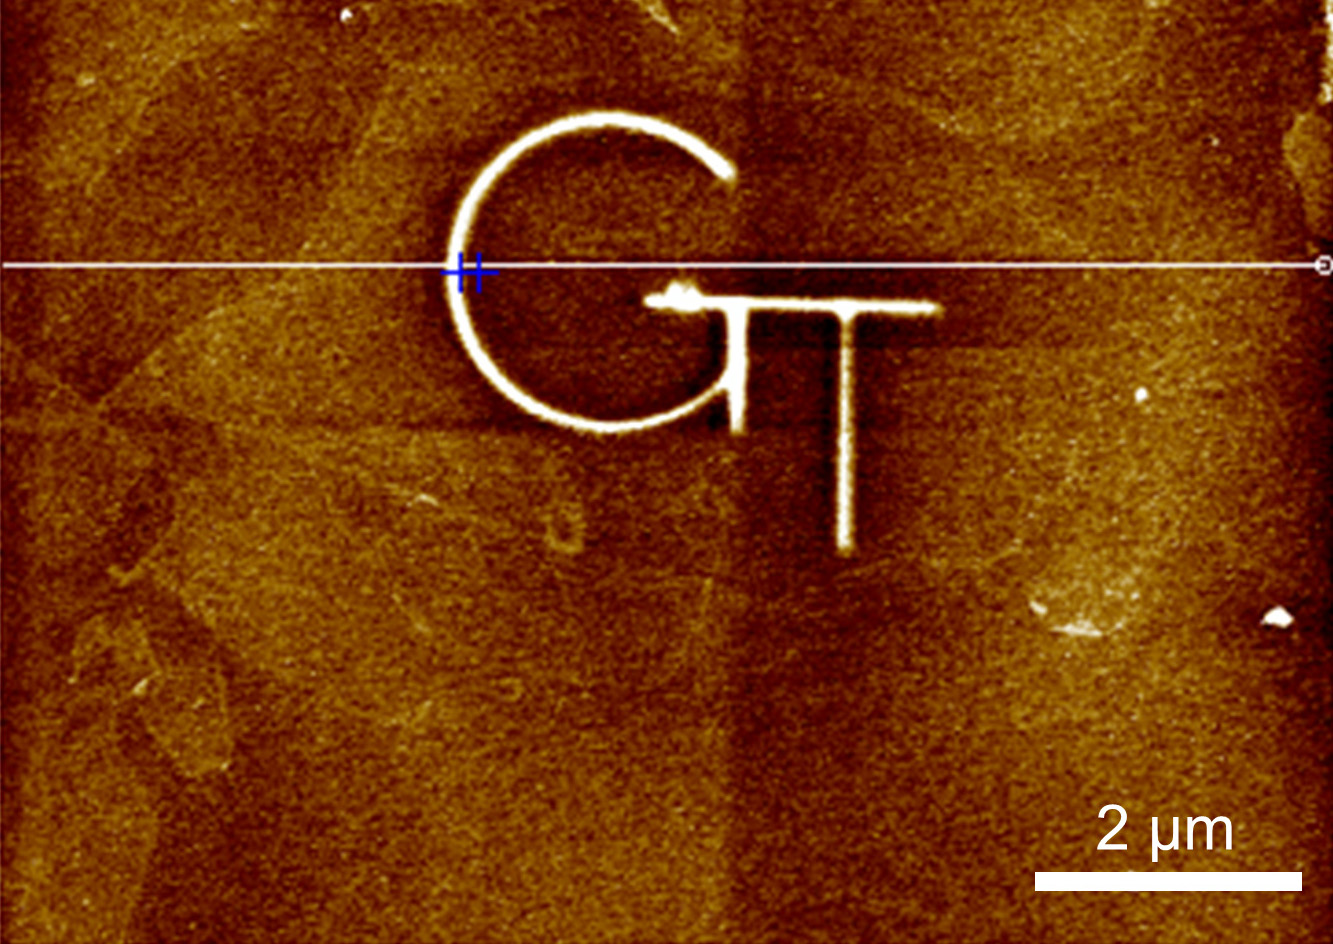 Image shows the deposition of carbon on a graphene oxide surface to create a raised logo with a height of 2.5 nanometers. 